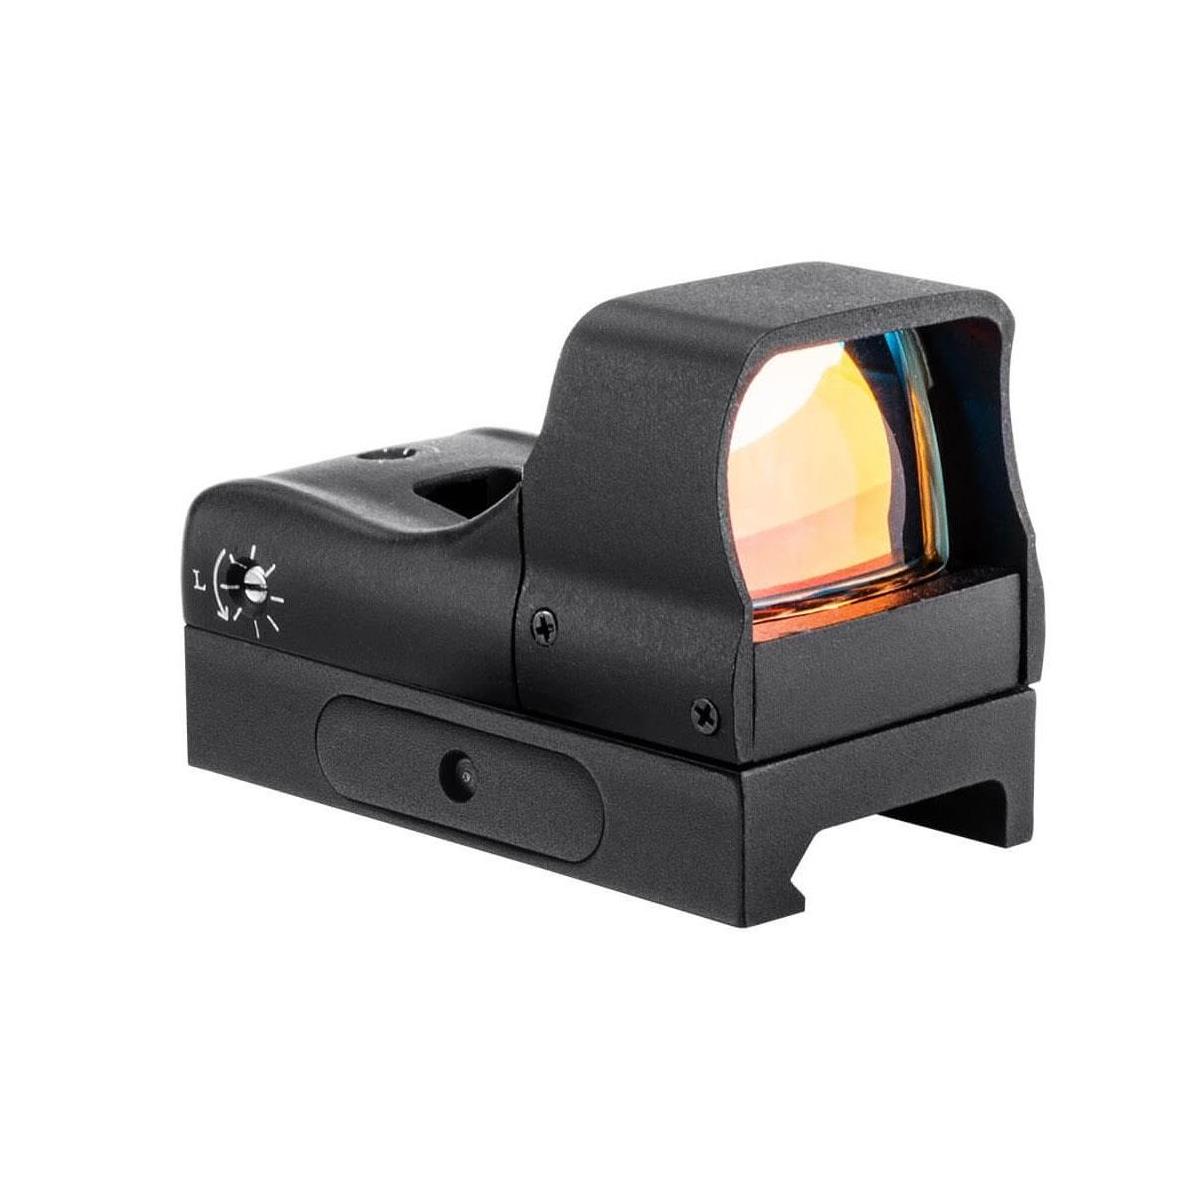 Image of Barska 1x30 ION Reflex Sight with 3 MOA Red Dot Reticle